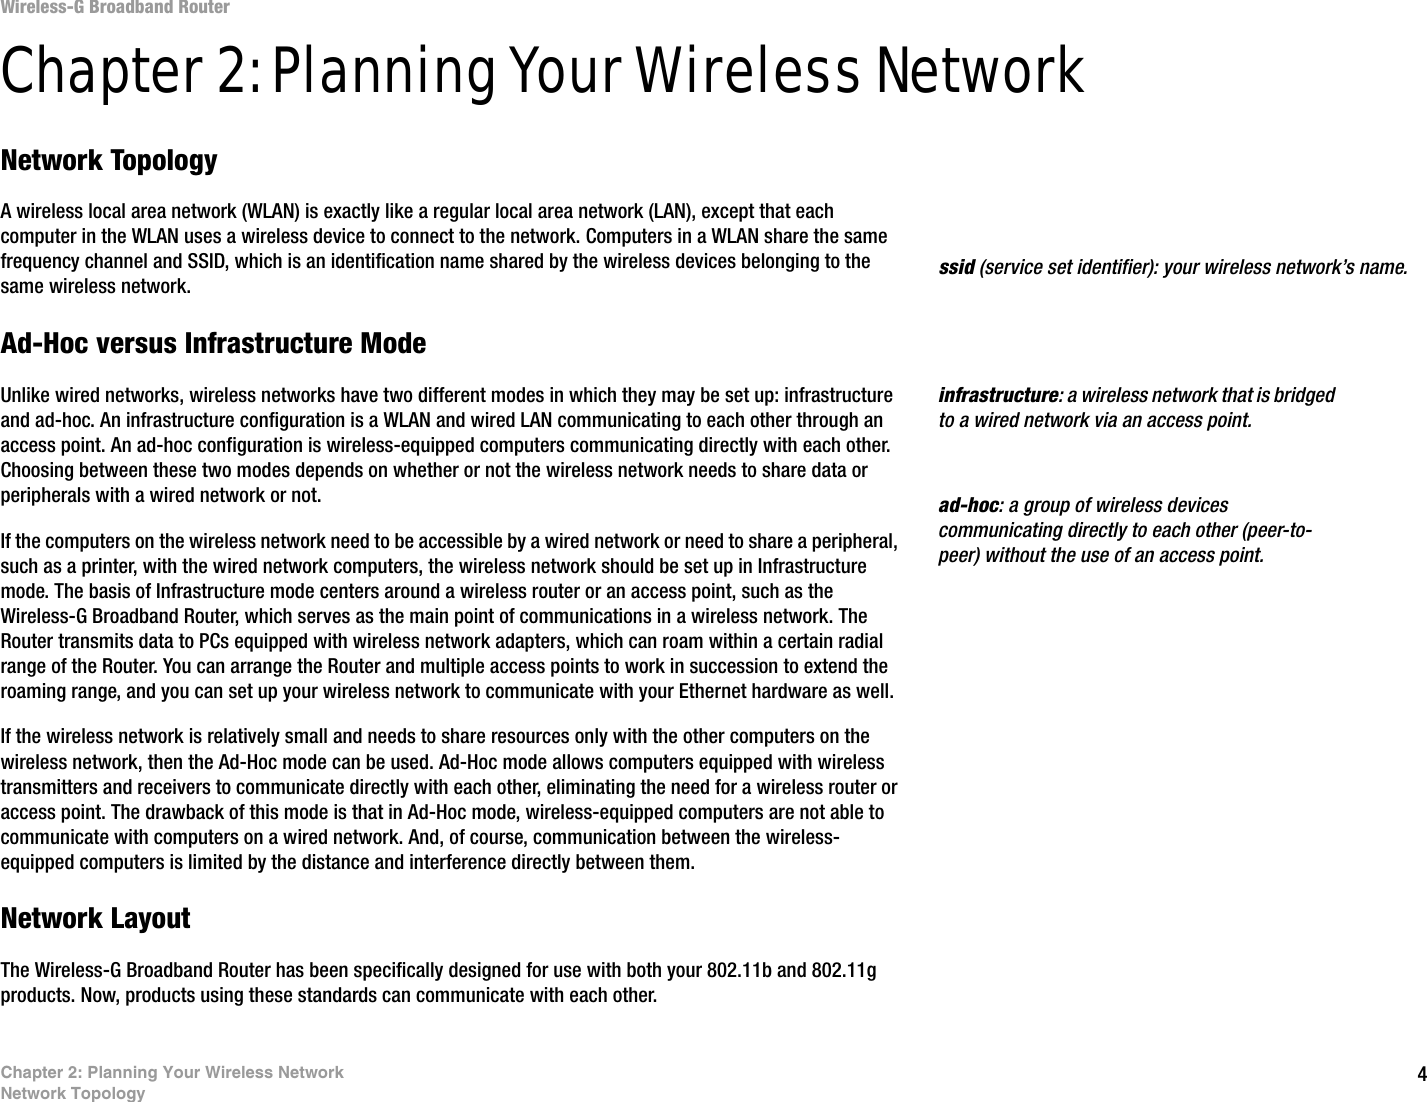 4Chapter 2: Planning Your Wireless NetworkNetwork TopologyWireless-G Broadband RouterChapter 2: Planning Your Wireless NetworkNetwork TopologyA wireless local area network (WLAN) is exactly like a regular local area network (LAN), except that each computer in the WLAN uses a wireless device to connect to the network. Computers in a WLAN share the same frequency channel and SSID, which is an identification name shared by the wireless devices belonging to the same wireless network.Ad-Hoc versus Infrastructure ModeUnlike wired networks, wireless networks have two different modes in which they may be set up: infrastructure and ad-hoc. An infrastructure configuration is a WLAN and wired LAN communicating to each other through an access point. An ad-hoc configuration is wireless-equipped computers communicating directly with each other. Choosing between these two modes depends on whether or not the wireless network needs to share data or peripherals with a wired network or not. If the computers on the wireless network need to be accessible by a wired network or need to share a peripheral, such as a printer, with the wired network computers, the wireless network should be set up in Infrastructure mode. The basis of Infrastructure mode centers around a wireless router or an access point, such as the Wireless-G Broadband Router, which serves as the main point of communications in a wireless network. The Router transmits data to PCs equipped with wireless network adapters, which can roam within a certain radial range of the Router. You can arrange the Router and multiple access points to work in succession to extend the roaming range, and you can set up your wireless network to communicate with your Ethernet hardware as well. If the wireless network is relatively small and needs to share resources only with the other computers on the wireless network, then the Ad-Hoc mode can be used. Ad-Hoc mode allows computers equipped with wireless transmitters and receivers to communicate directly with each other, eliminating the need for a wireless router or access point. The drawback of this mode is that in Ad-Hoc mode, wireless-equipped computers are not able to communicate with computers on a wired network. And, of course, communication between the wireless-equipped computers is limited by the distance and interference directly between them. Network LayoutThe Wireless-G Broadband Router has been specifically designed for use with both your 802.11b and 802.11g products. Now, products using these standards can communicate with each other.infrastructure: a wireless network that is bridged to a wired network via an access point.ssid (service set identifier): your wireless network’s name.ad-hoc: a group of wireless devices communicating directly to each other (peer-to-peer) without the use of an access point.